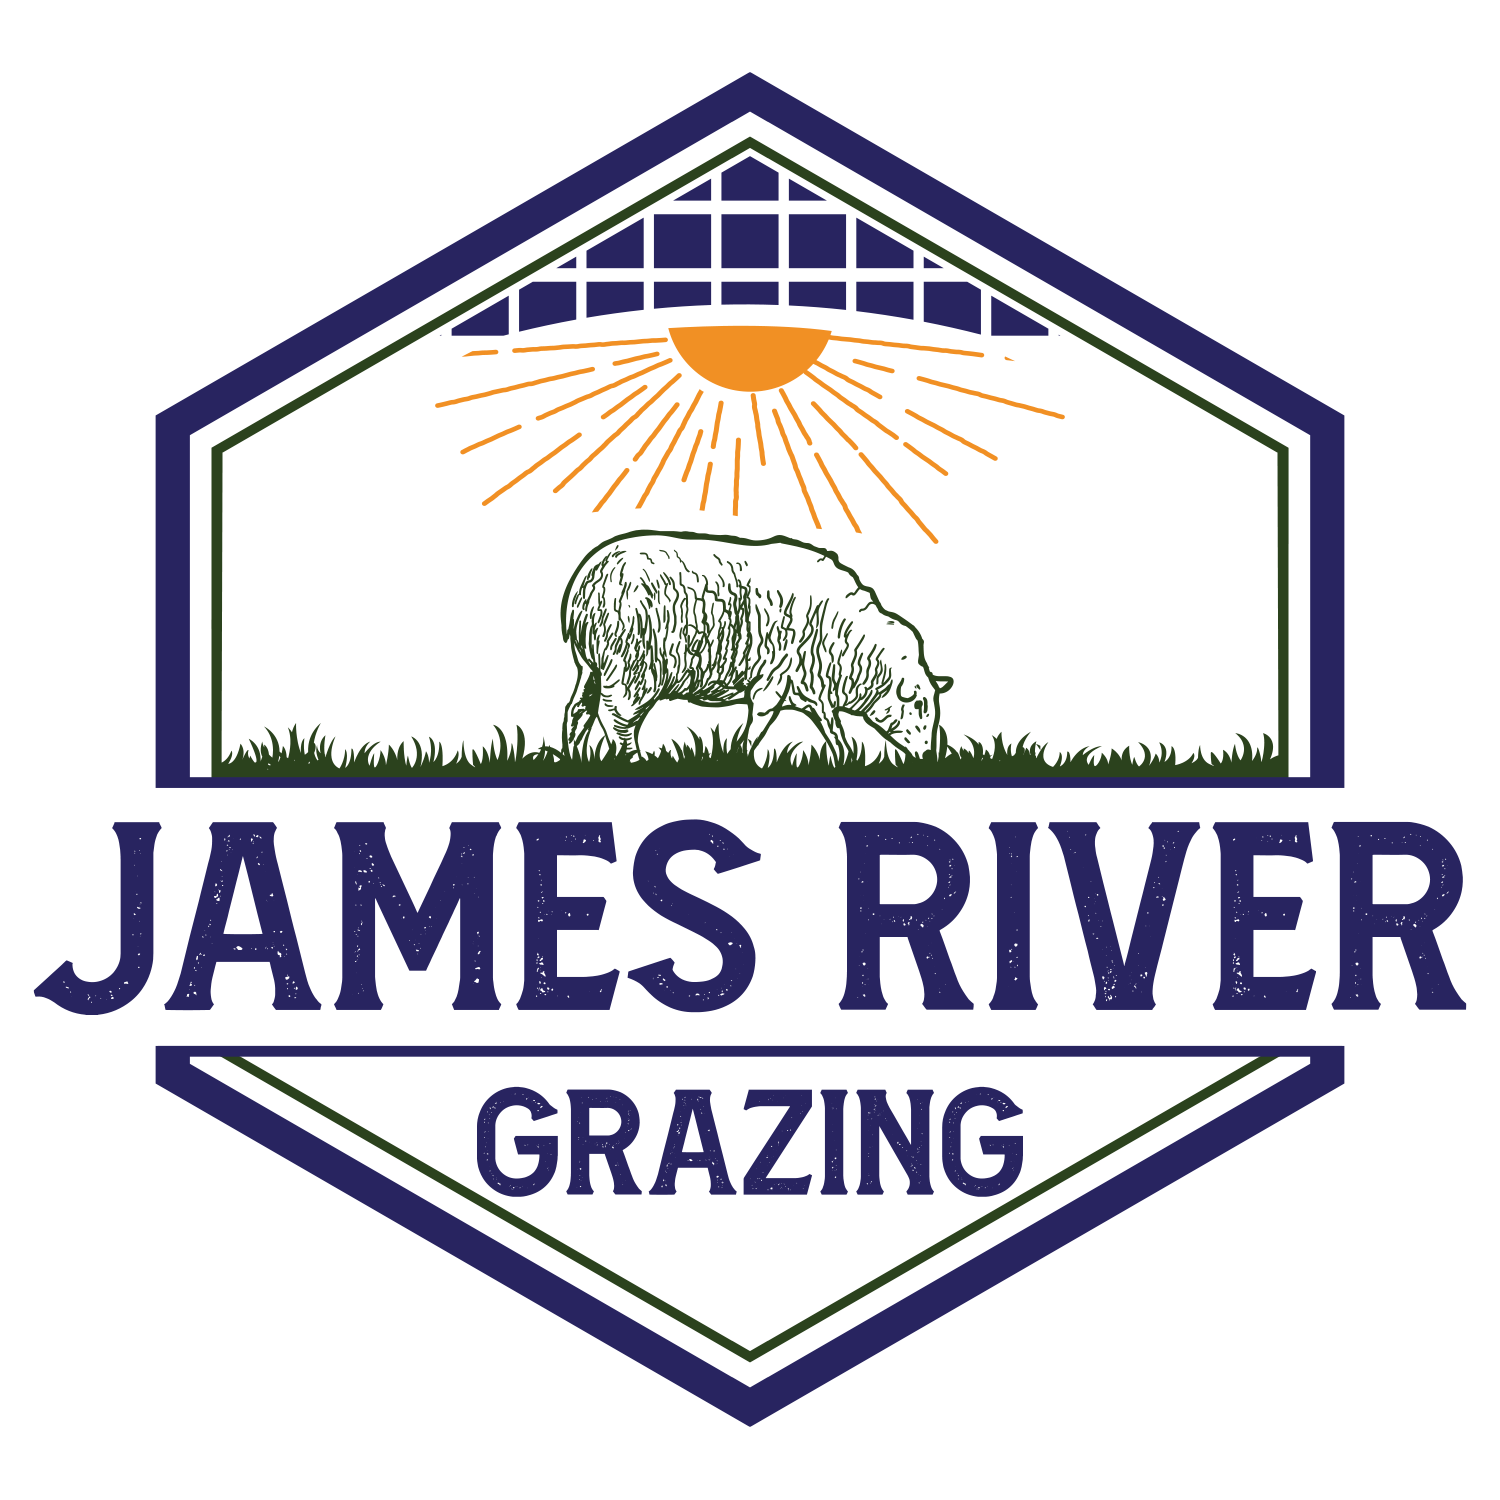 James River Grazing Co.